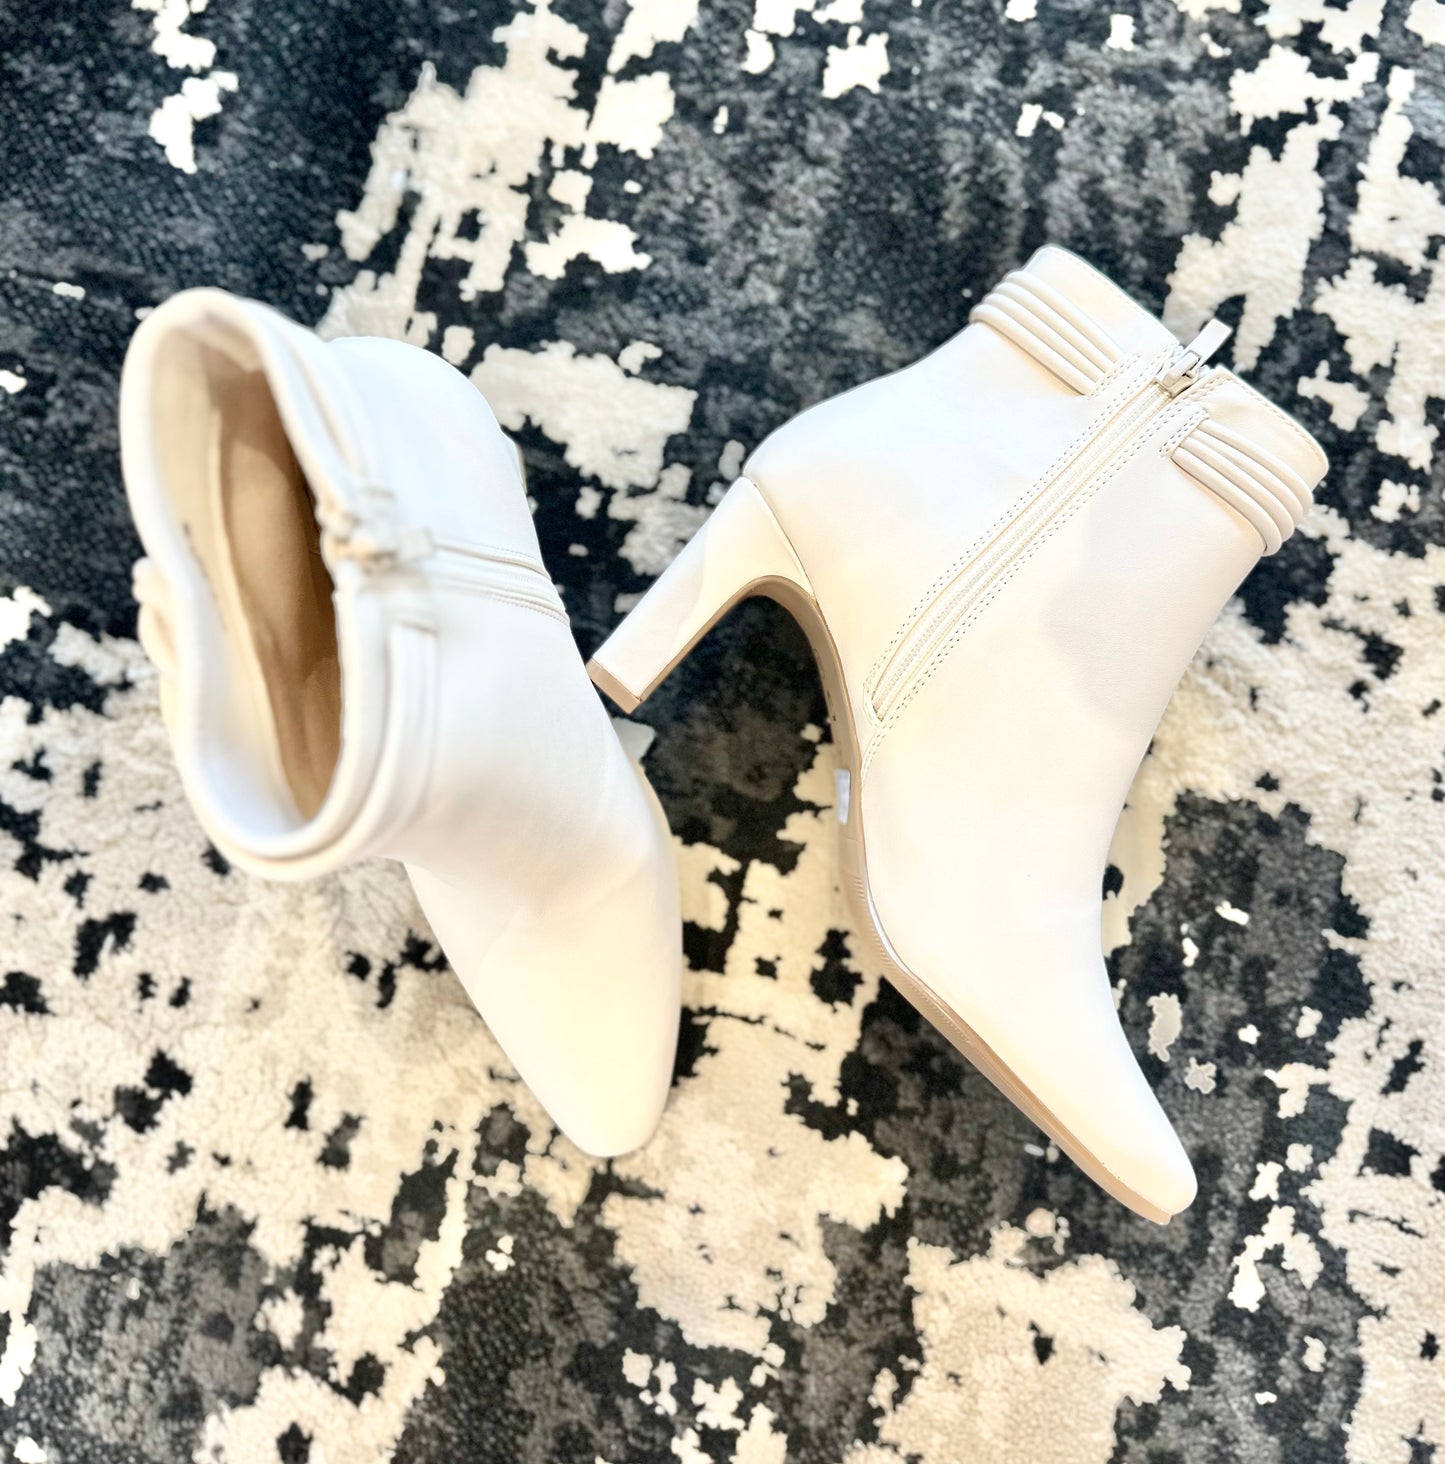 Never Ending Bootie in cream by Chinese Laundry